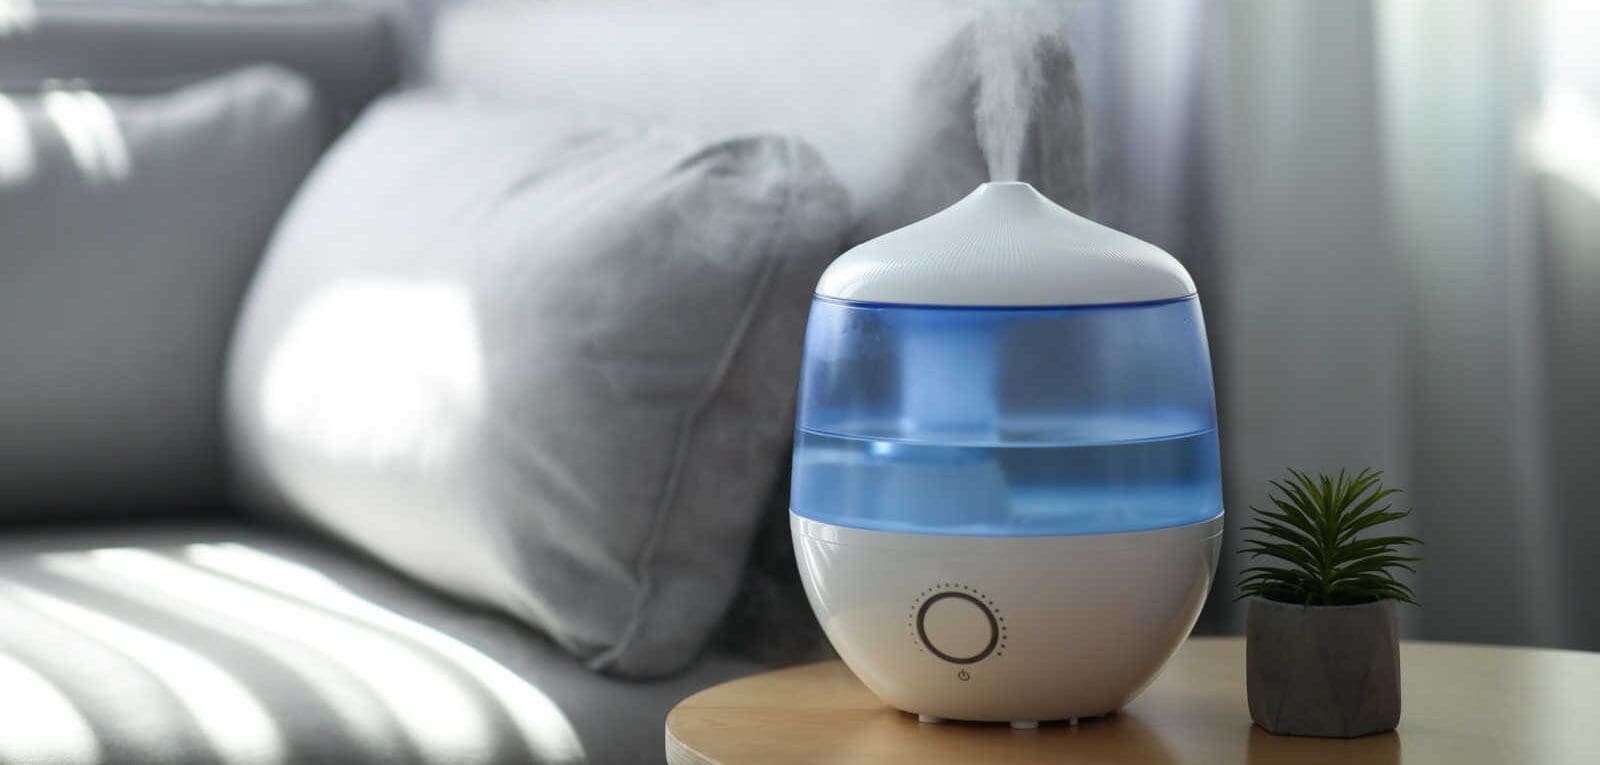 humidifiers work best to improve indoor air quality when using clean water.